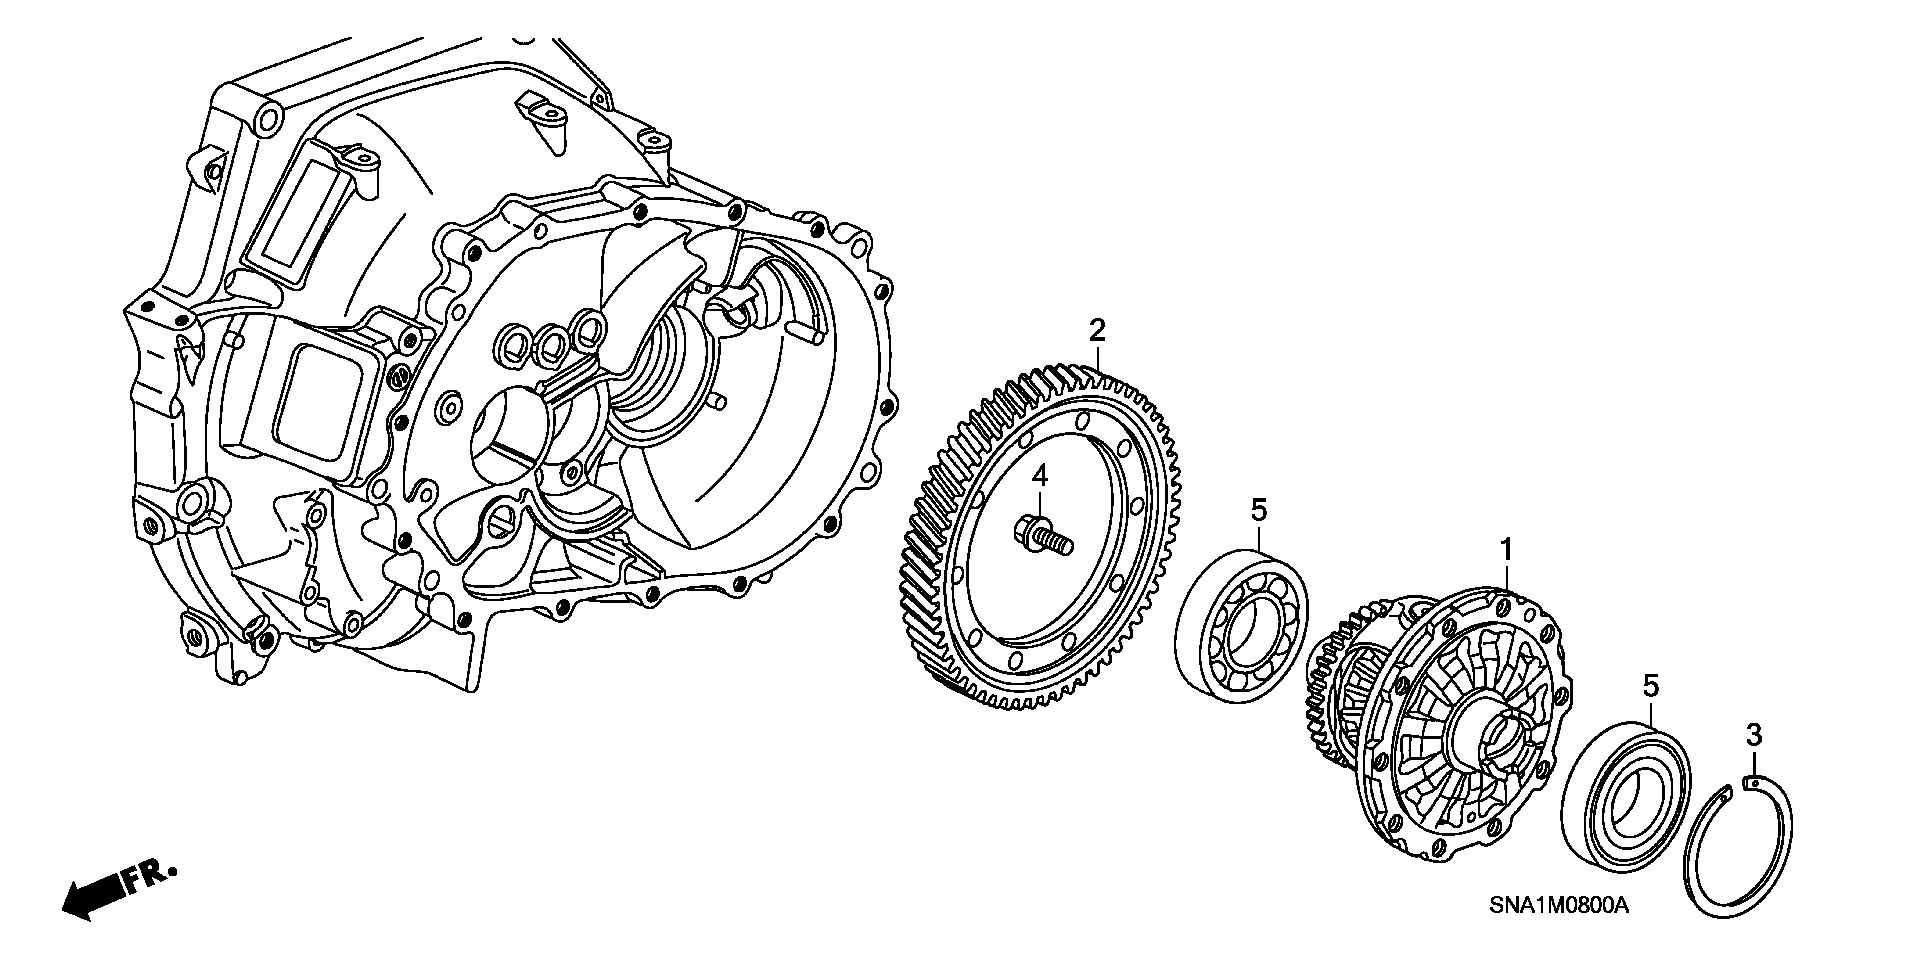 DIFFERENTIAL(1.8L)